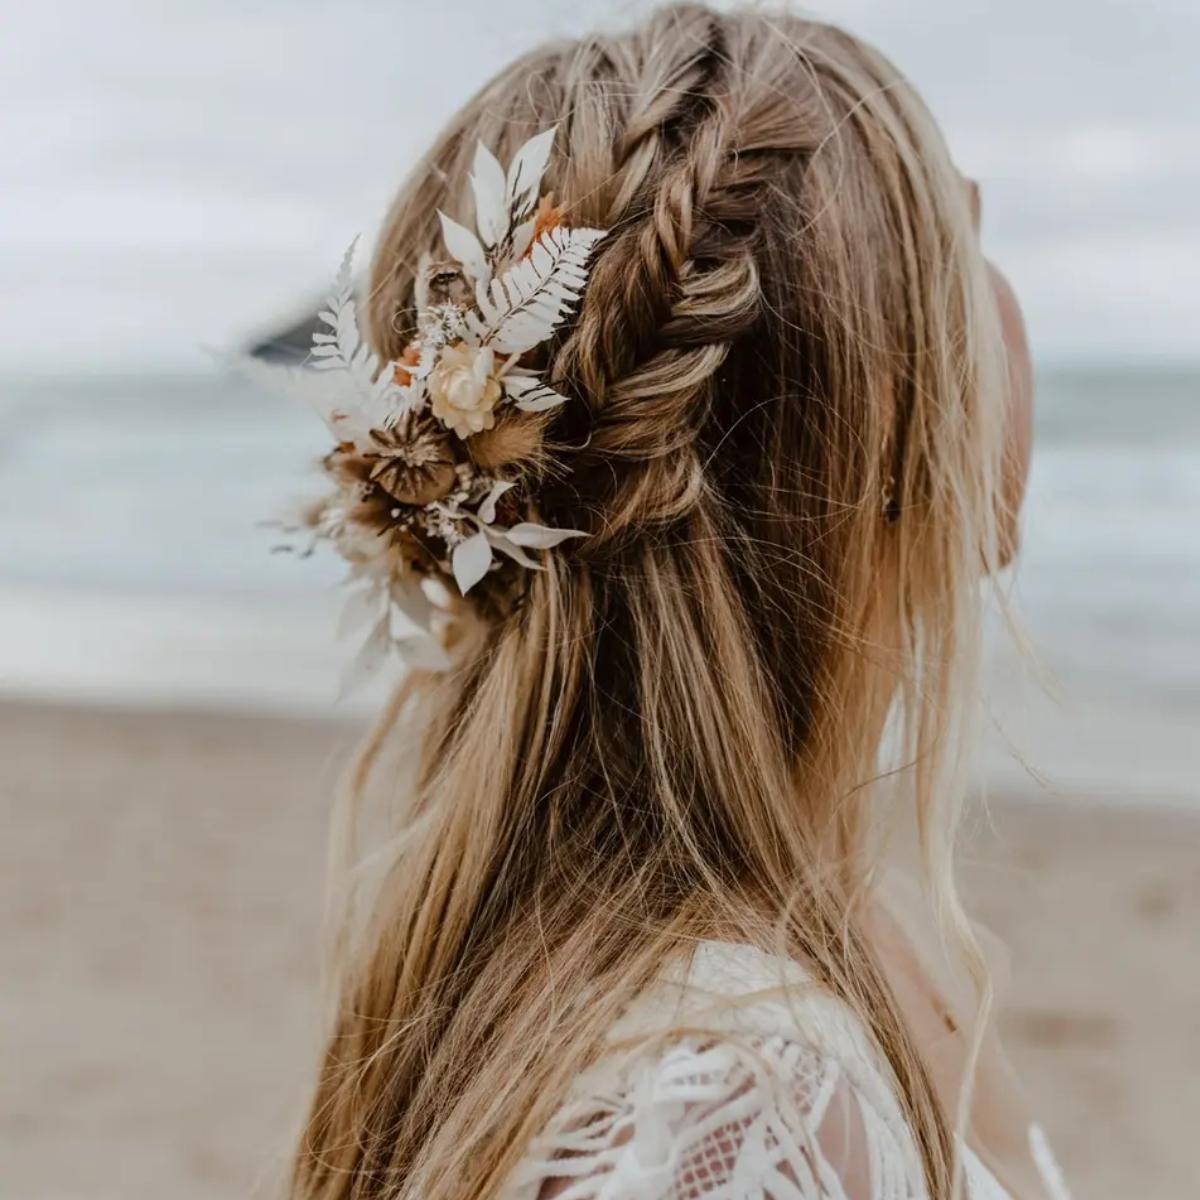 Best Beach Wedding Hairstyles: Tips and Ideas - EverAfterGuide